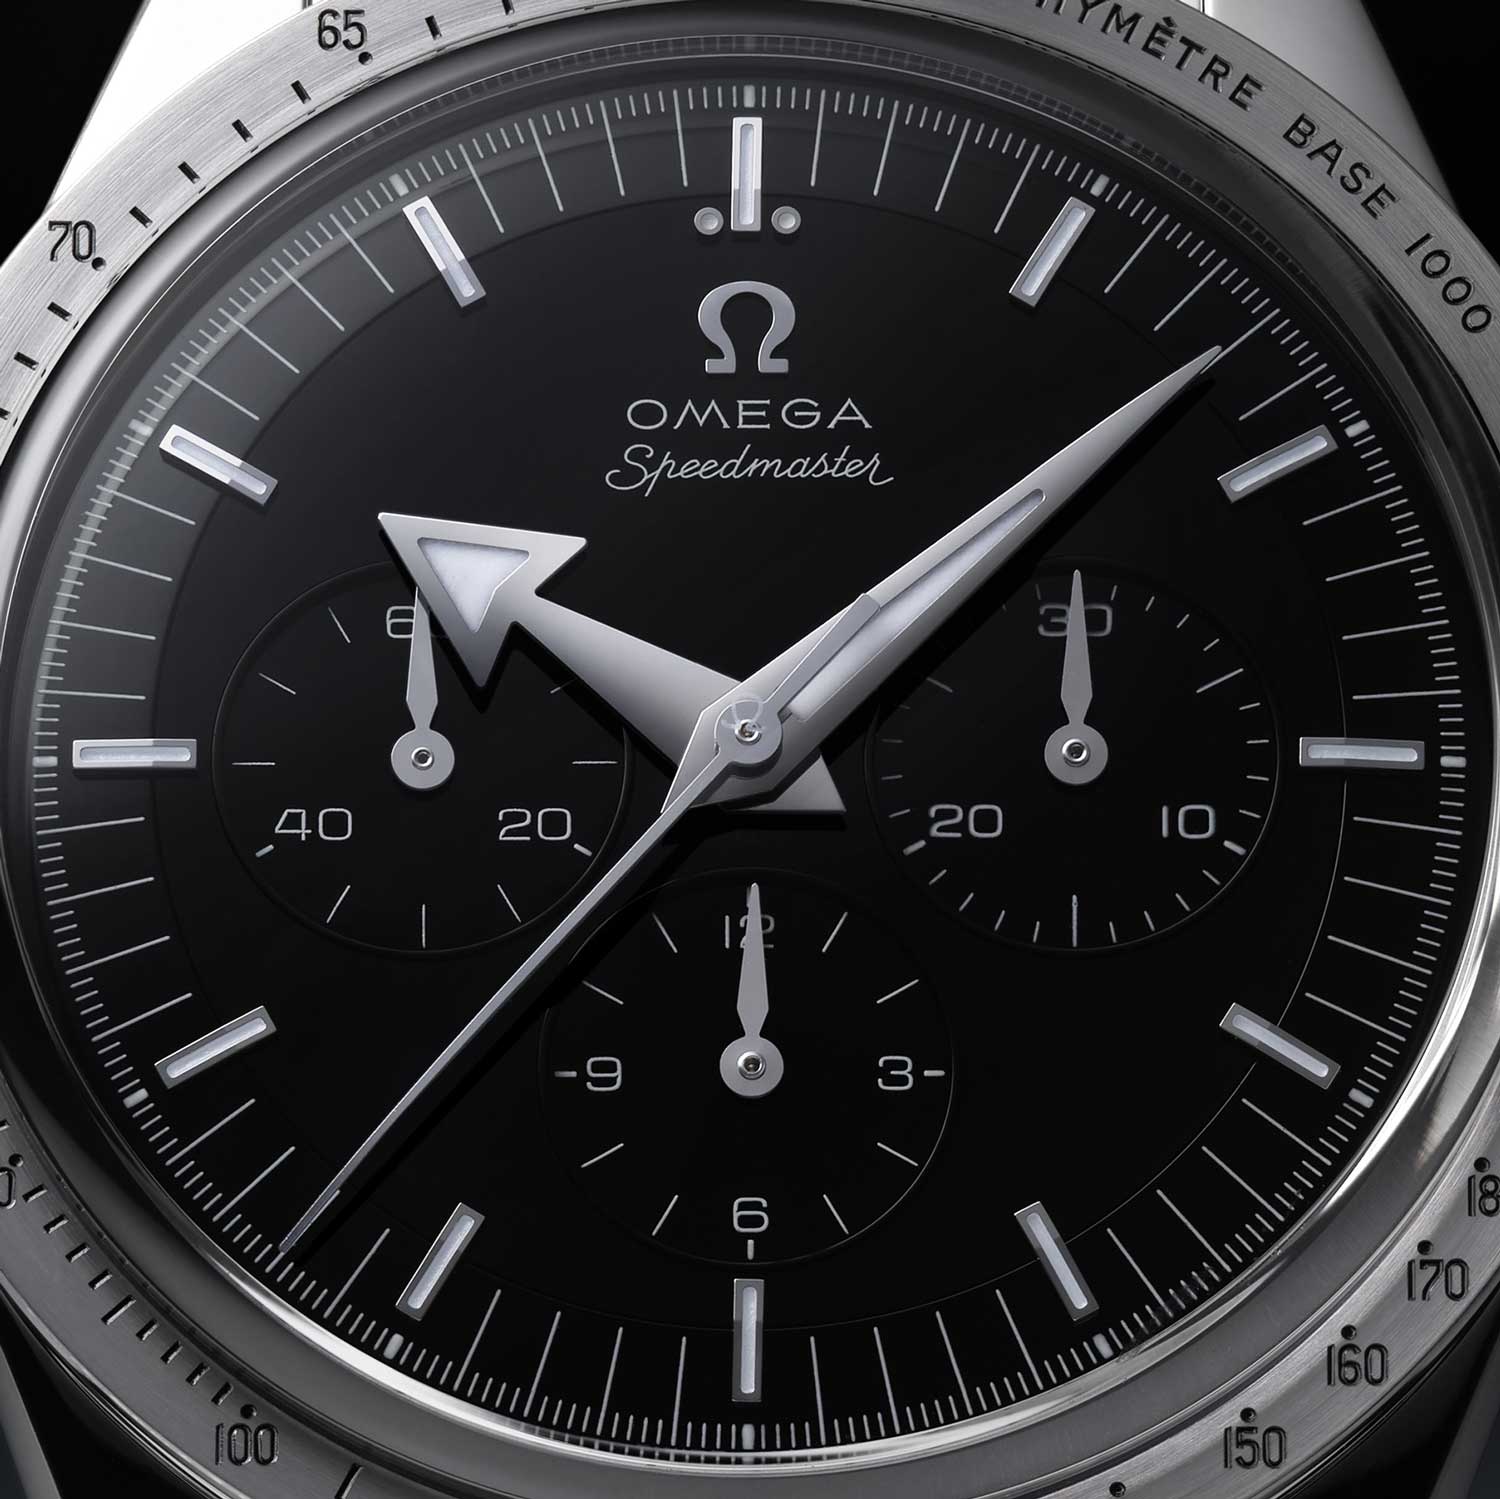 The deep black onyx stepped dial of the Speedmaster 321 Canopus Gold